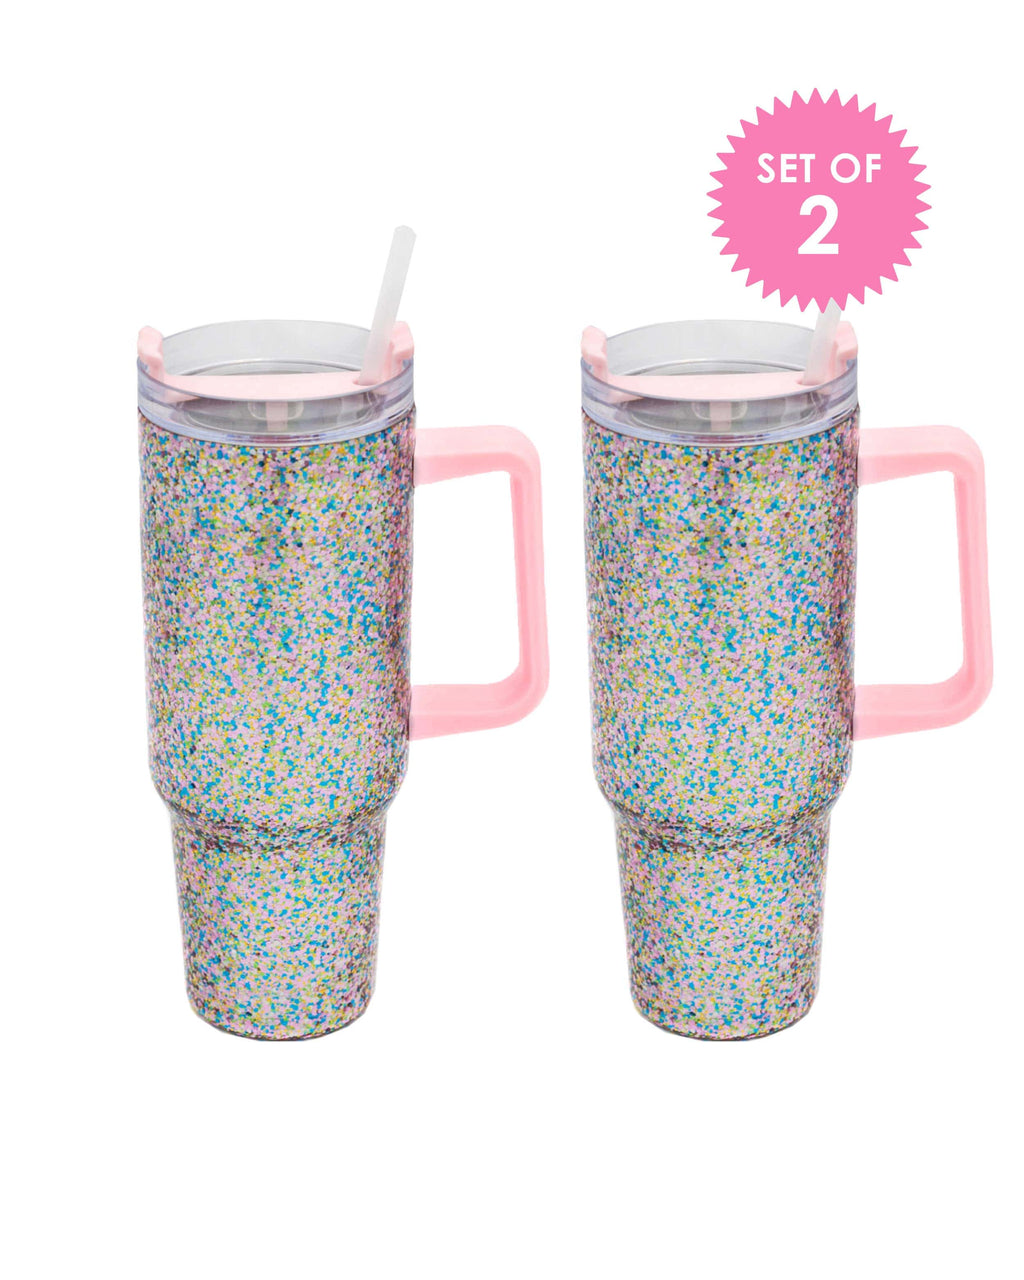 ban.do deluxe sip sip glitter bomb tumbler with straw